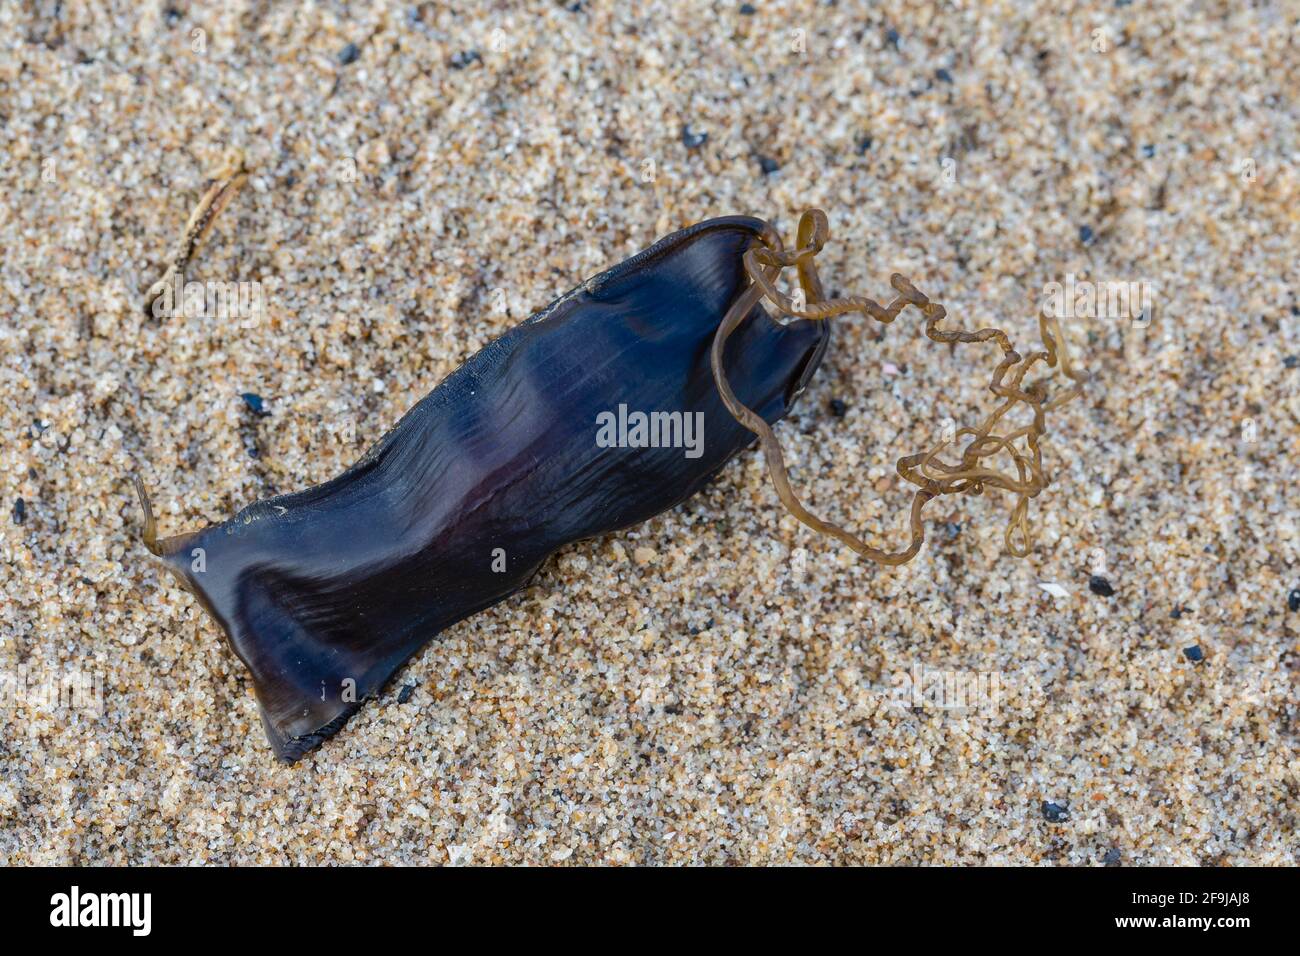 Old egg-case of Small-spotted Catshark, or Lesser-spotted Dogfish, Scyliorhinus canicula, on beach near Swansea, South Wales. Family Scyliorhinidae Stock Photo